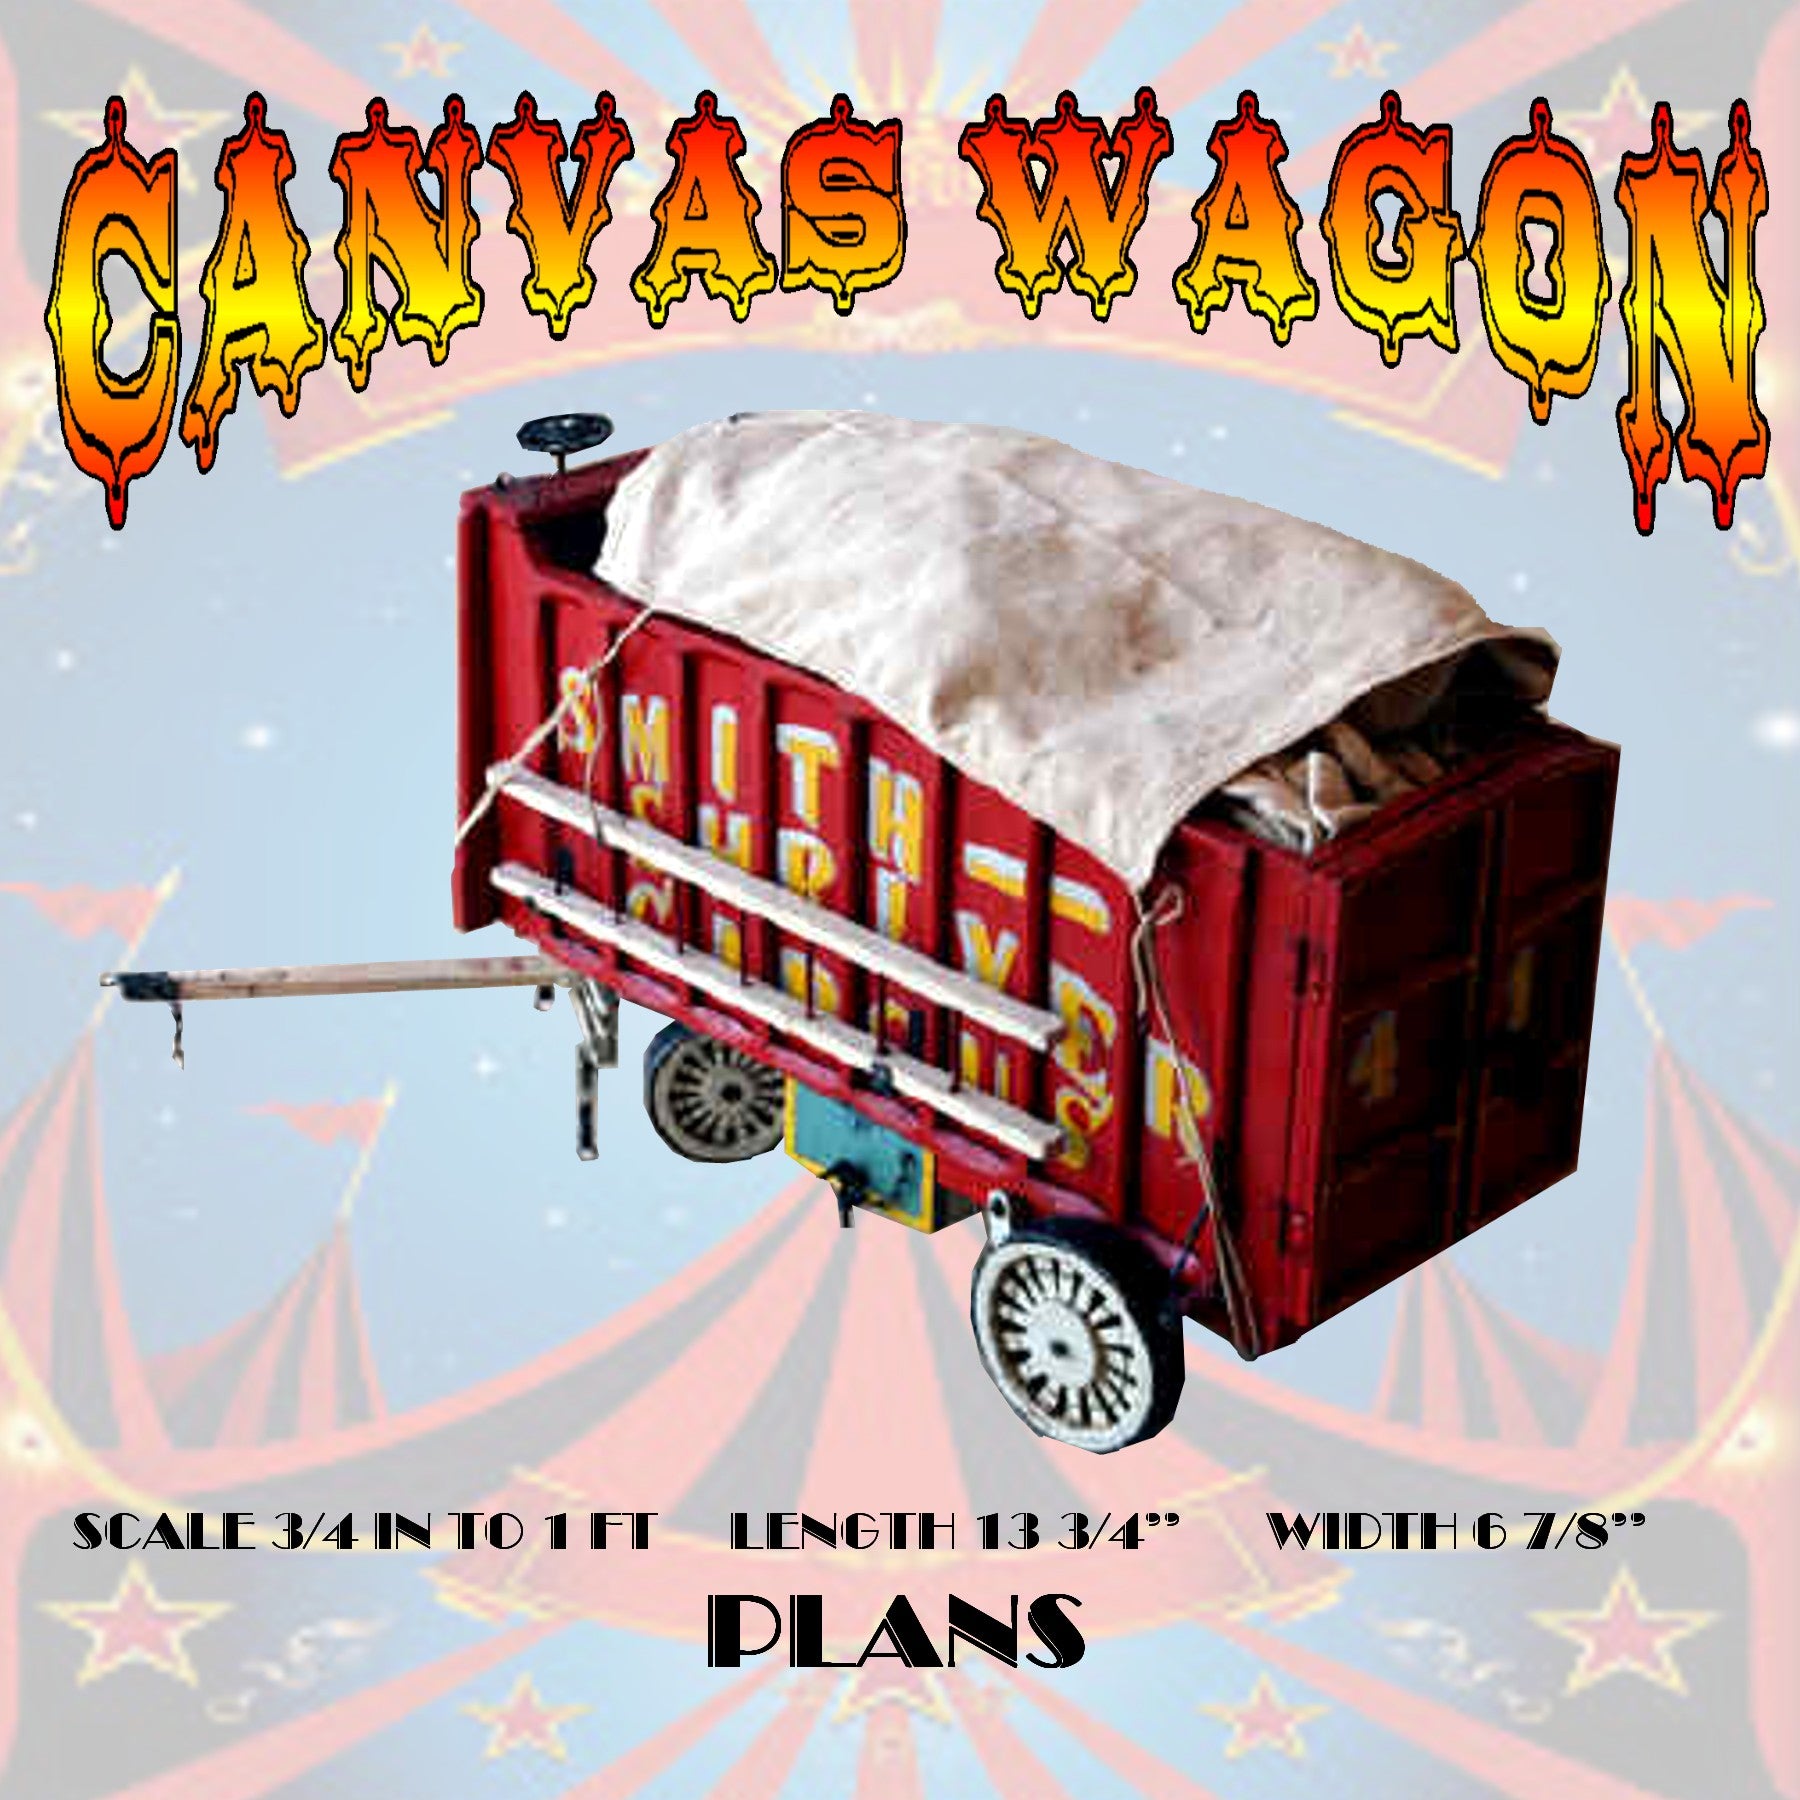 full size printed plans canvas wagon scale ¾ in to 1 ft  length 13 3/4 ”  width 6 7/8